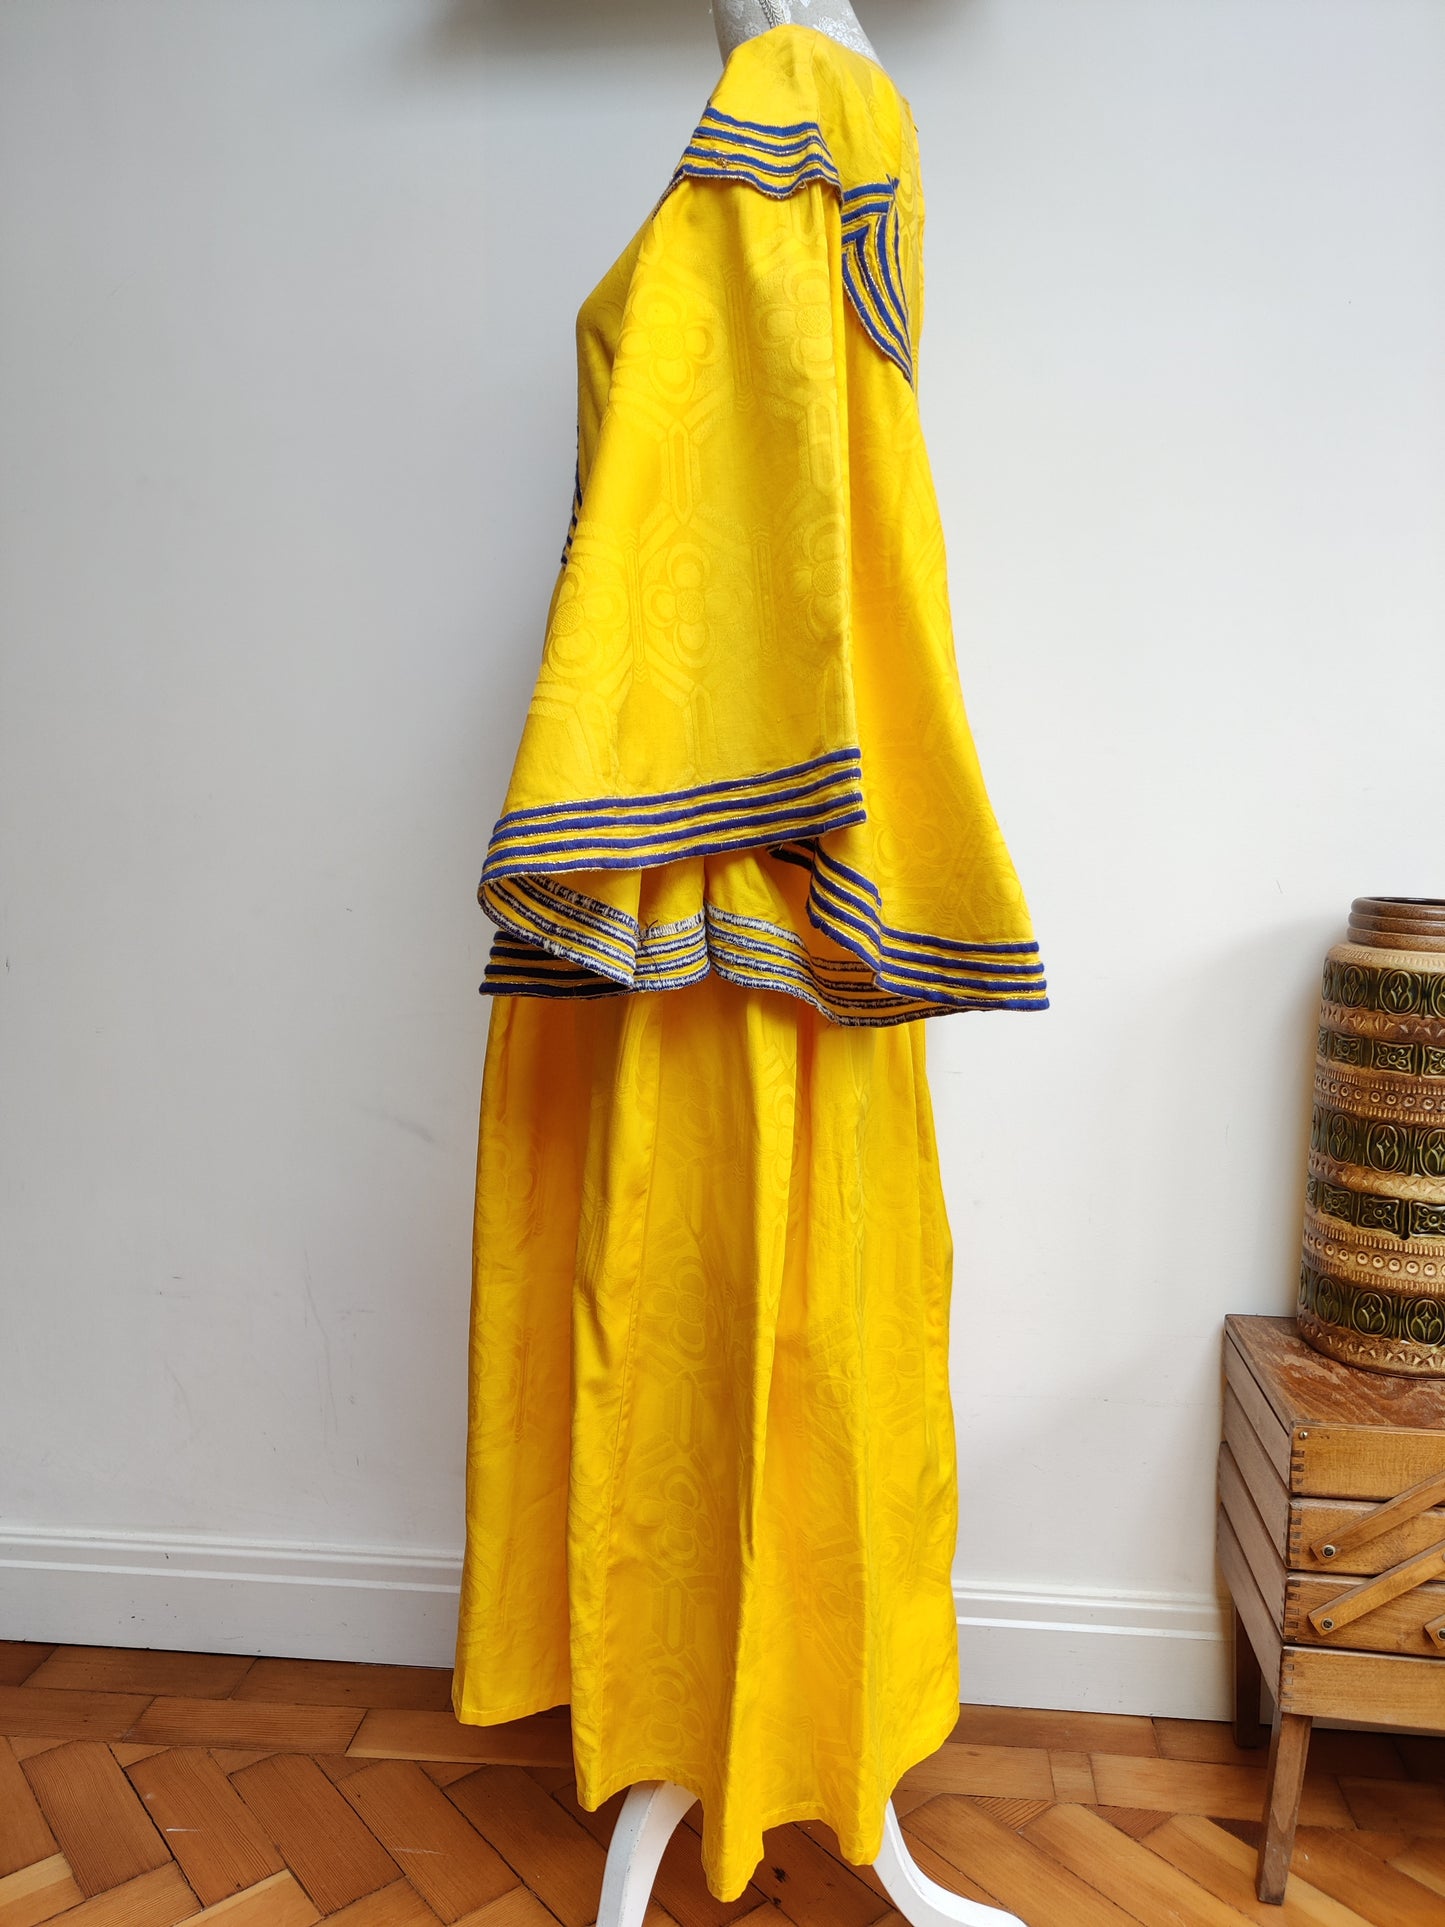 Spectacular yellow and blue vintage dress with batwing embroidery. Size 16-20